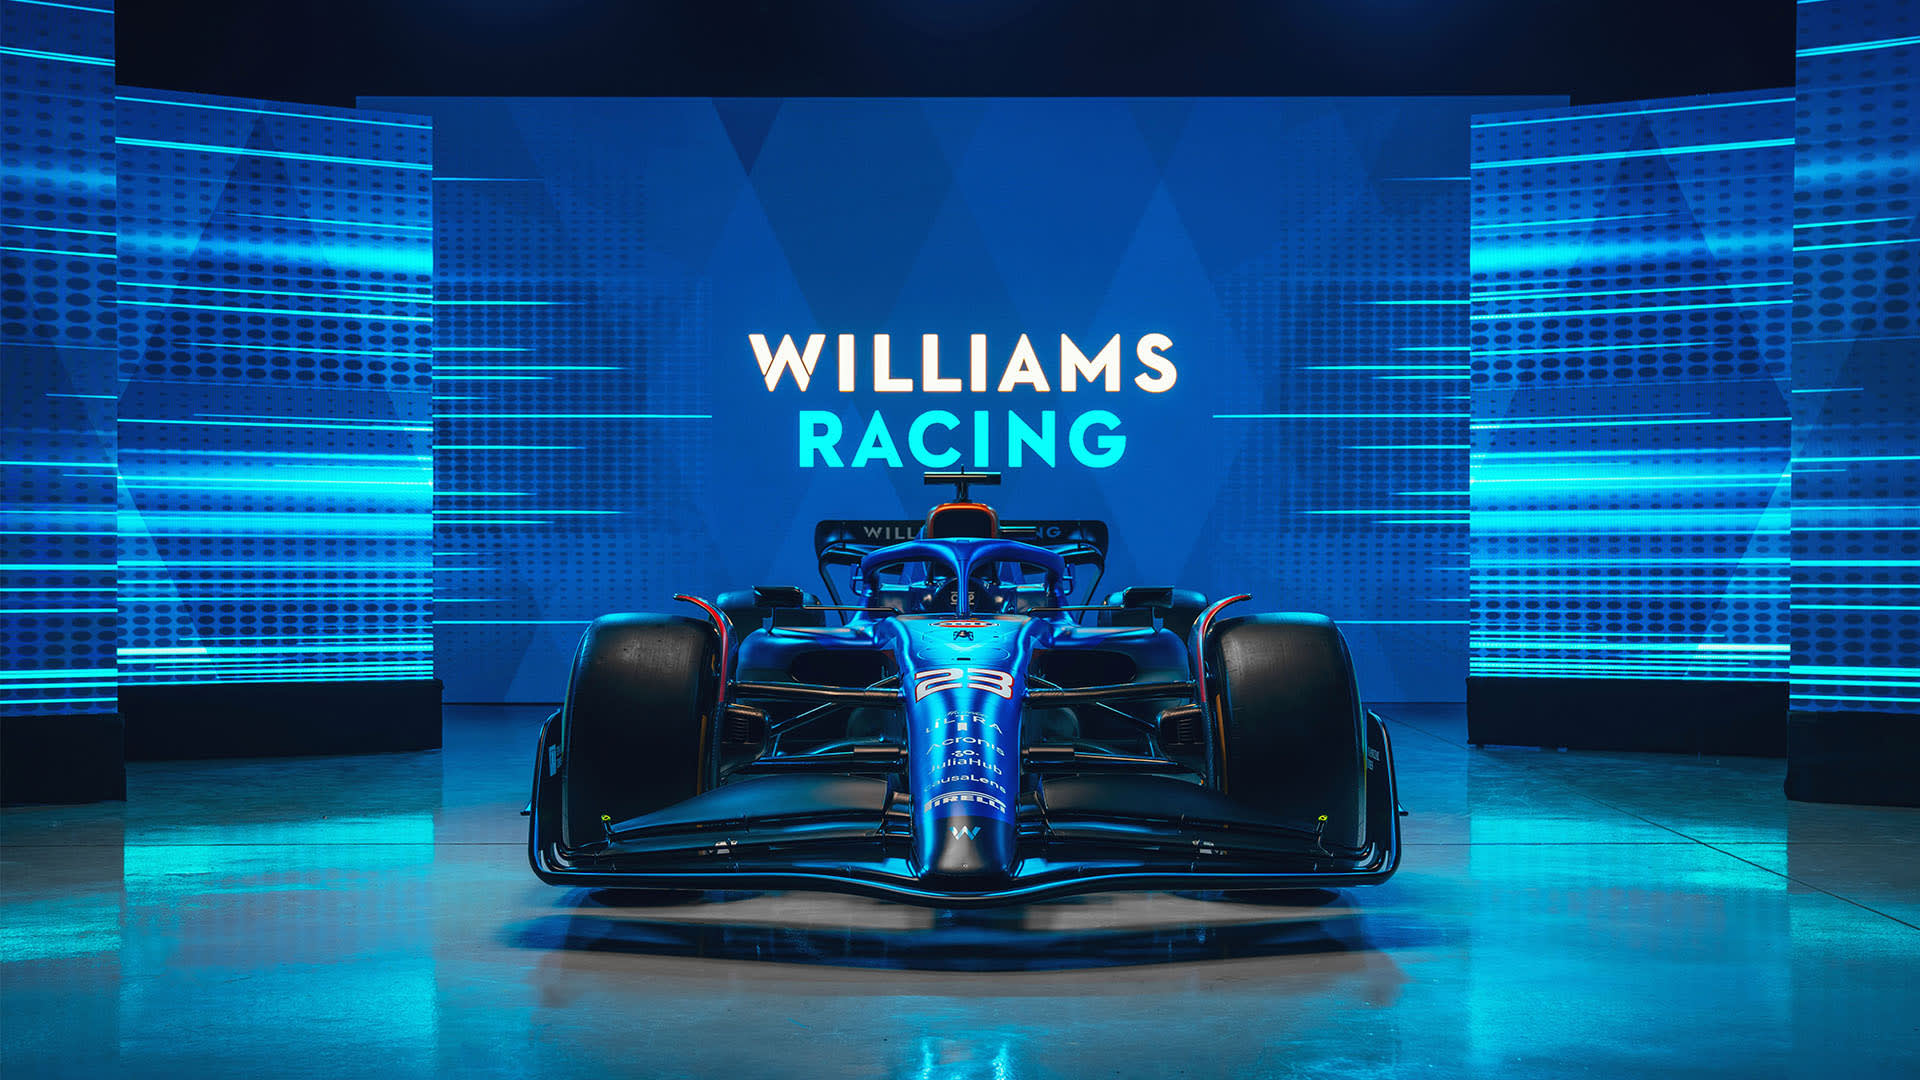 Williams reveal 2023 livery ahead of FW45 unveiling Formula 1®